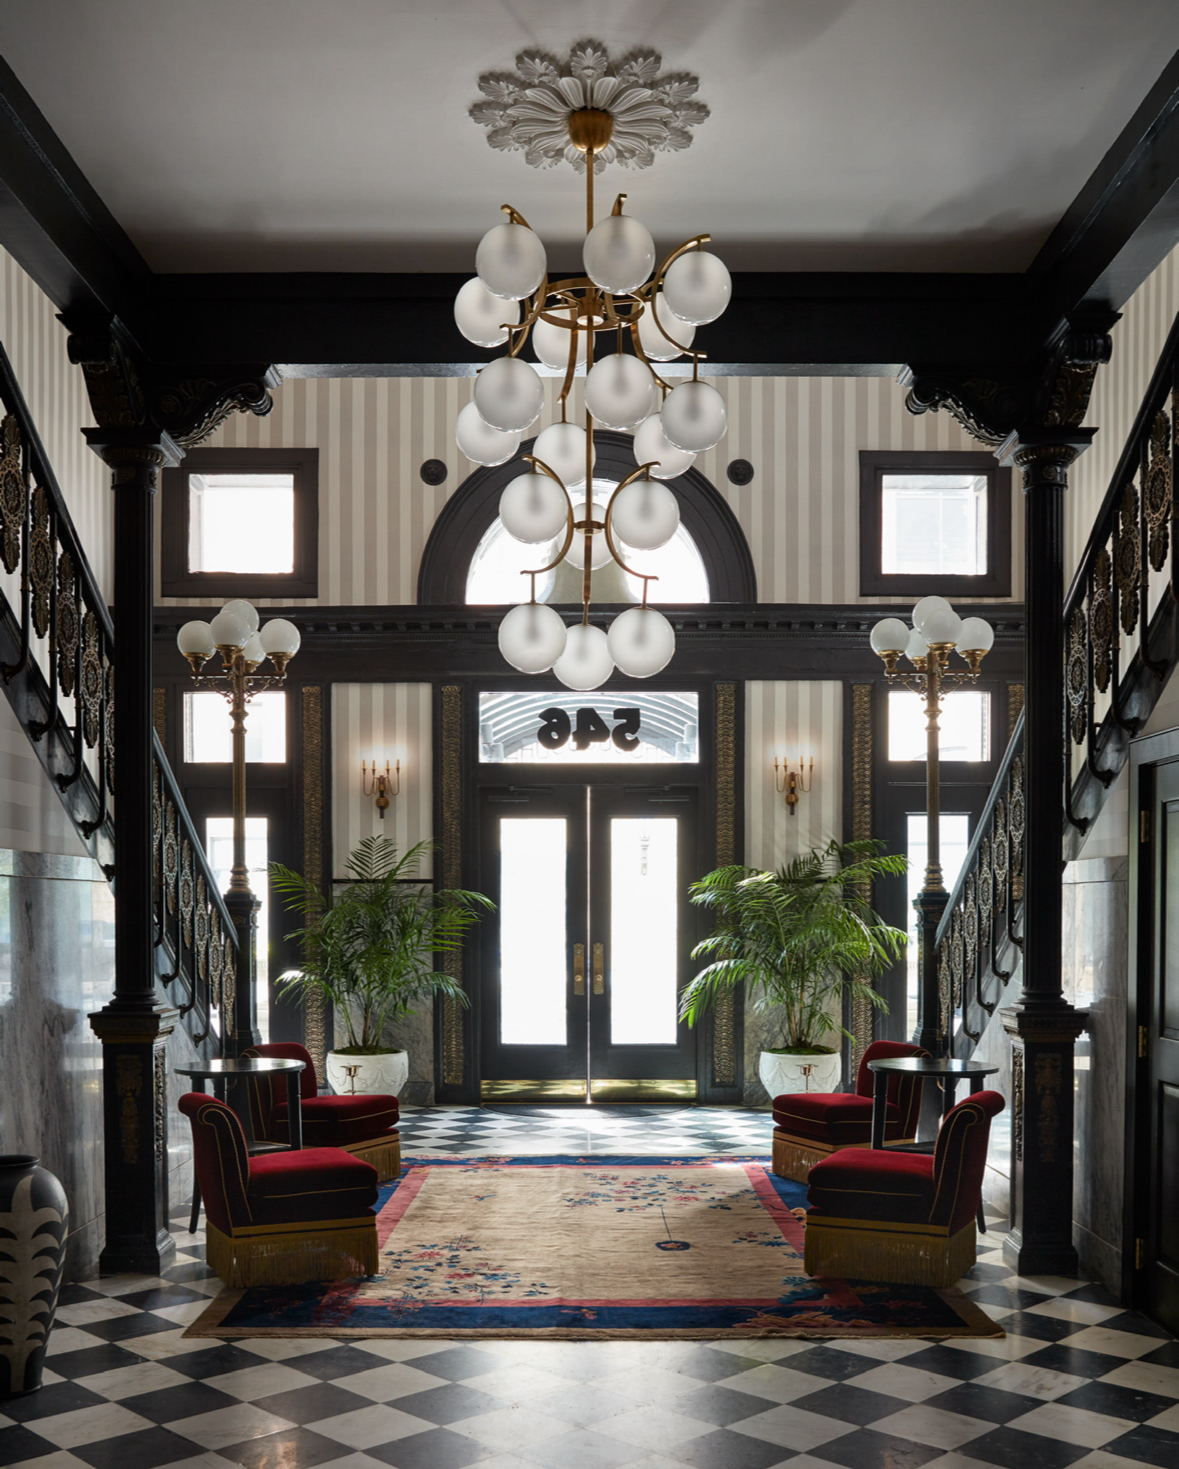 Hyatt expands in New Orleans with Maison Métier and The Barnett joining its Independent Collection, offering unique experiences and World of Hyatt benefits for modern travelers.